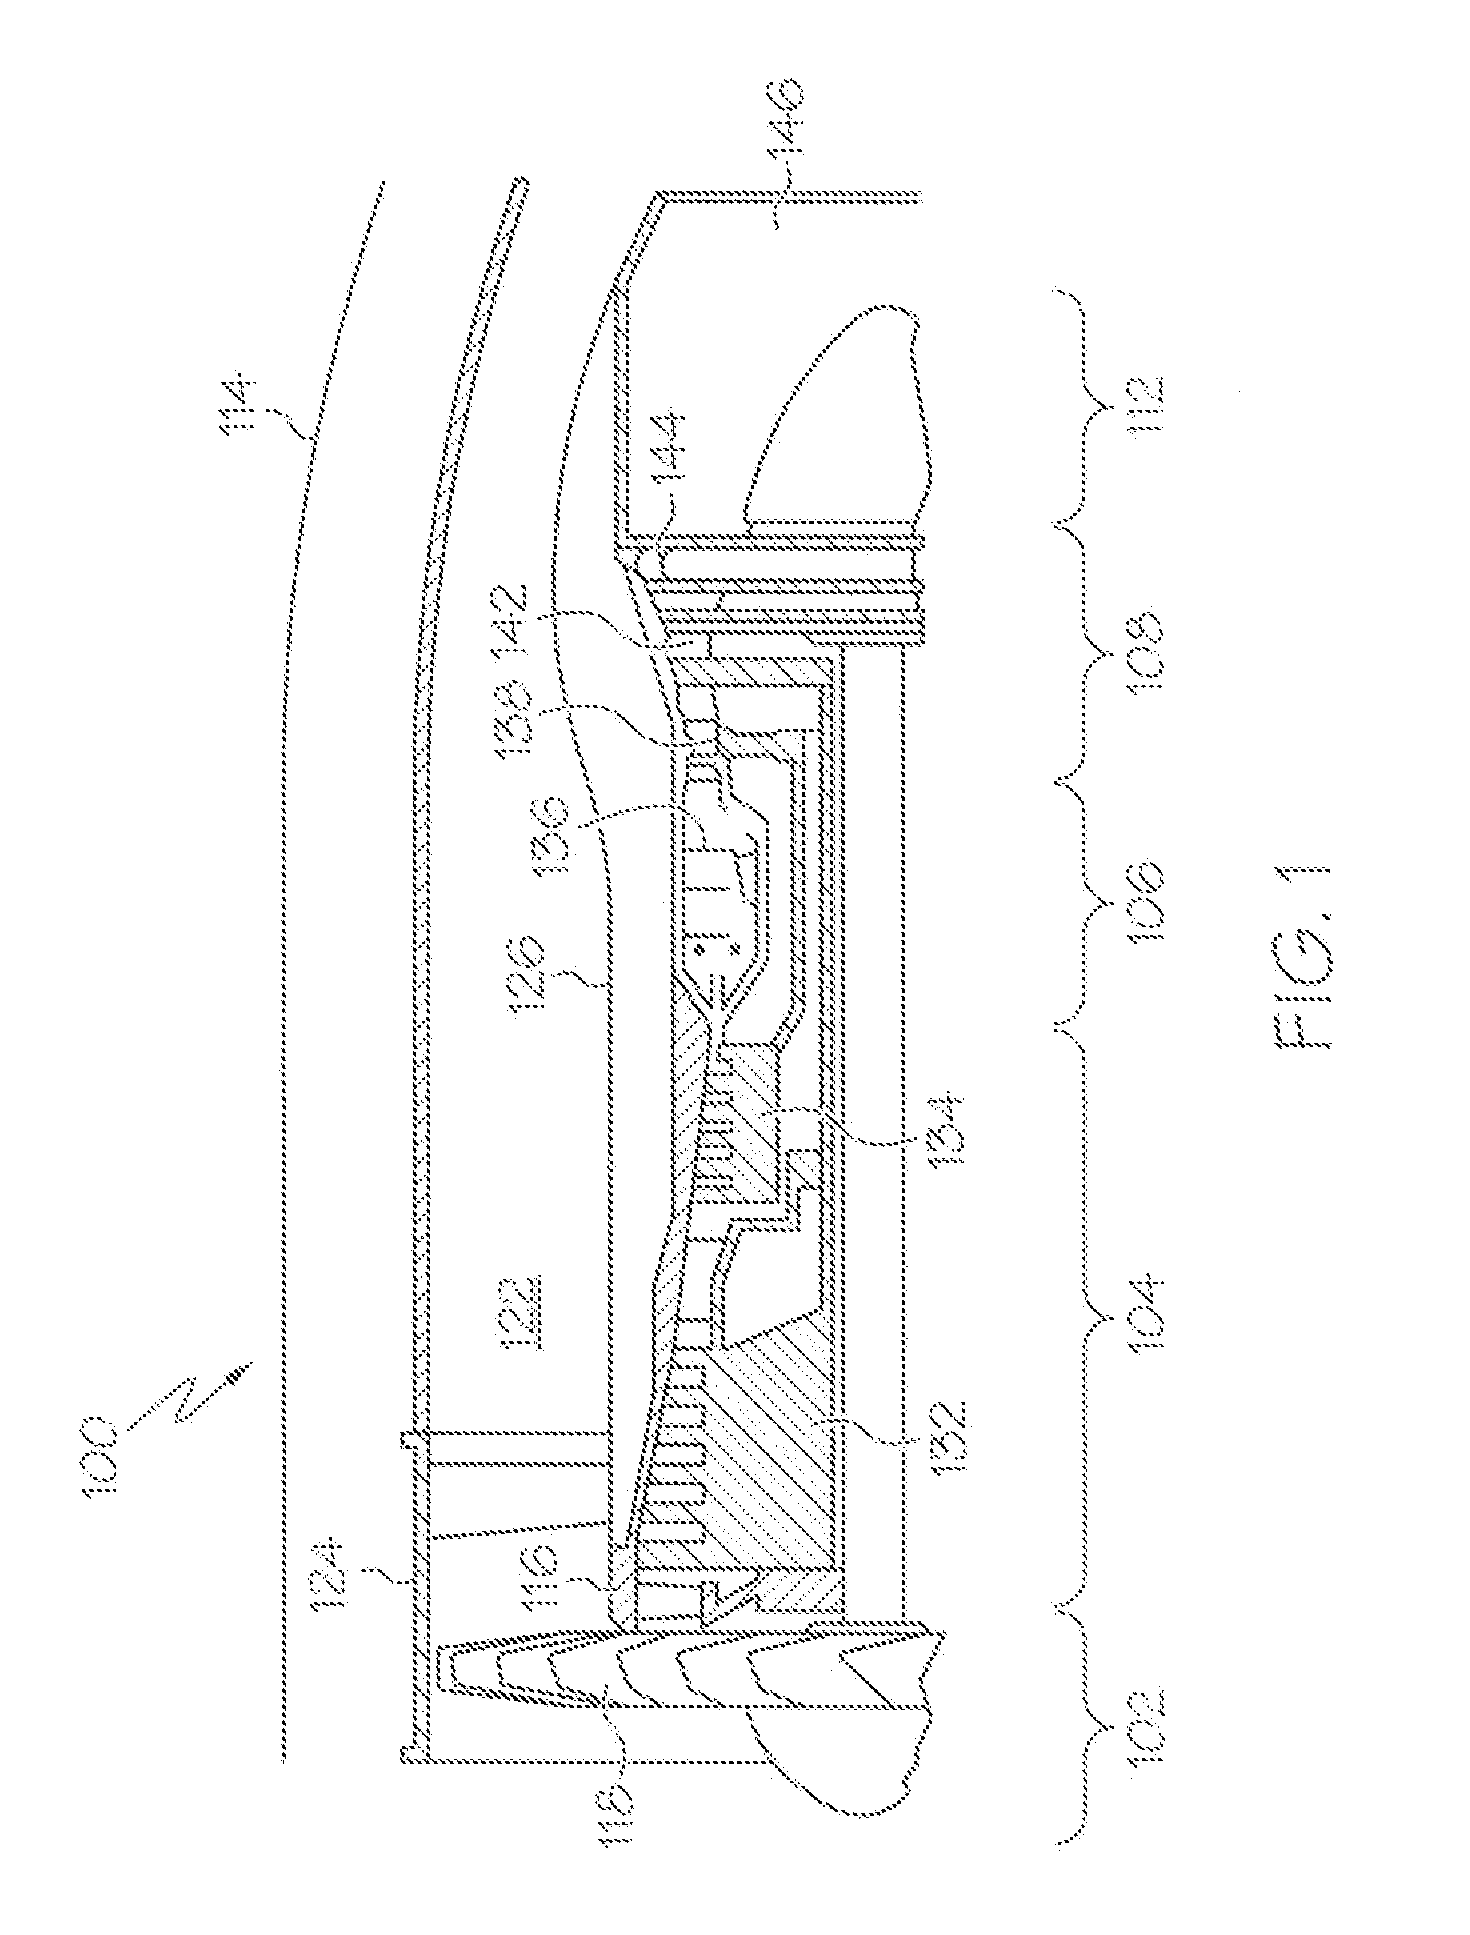 Gas turbine engine in-board cooled cooling air system